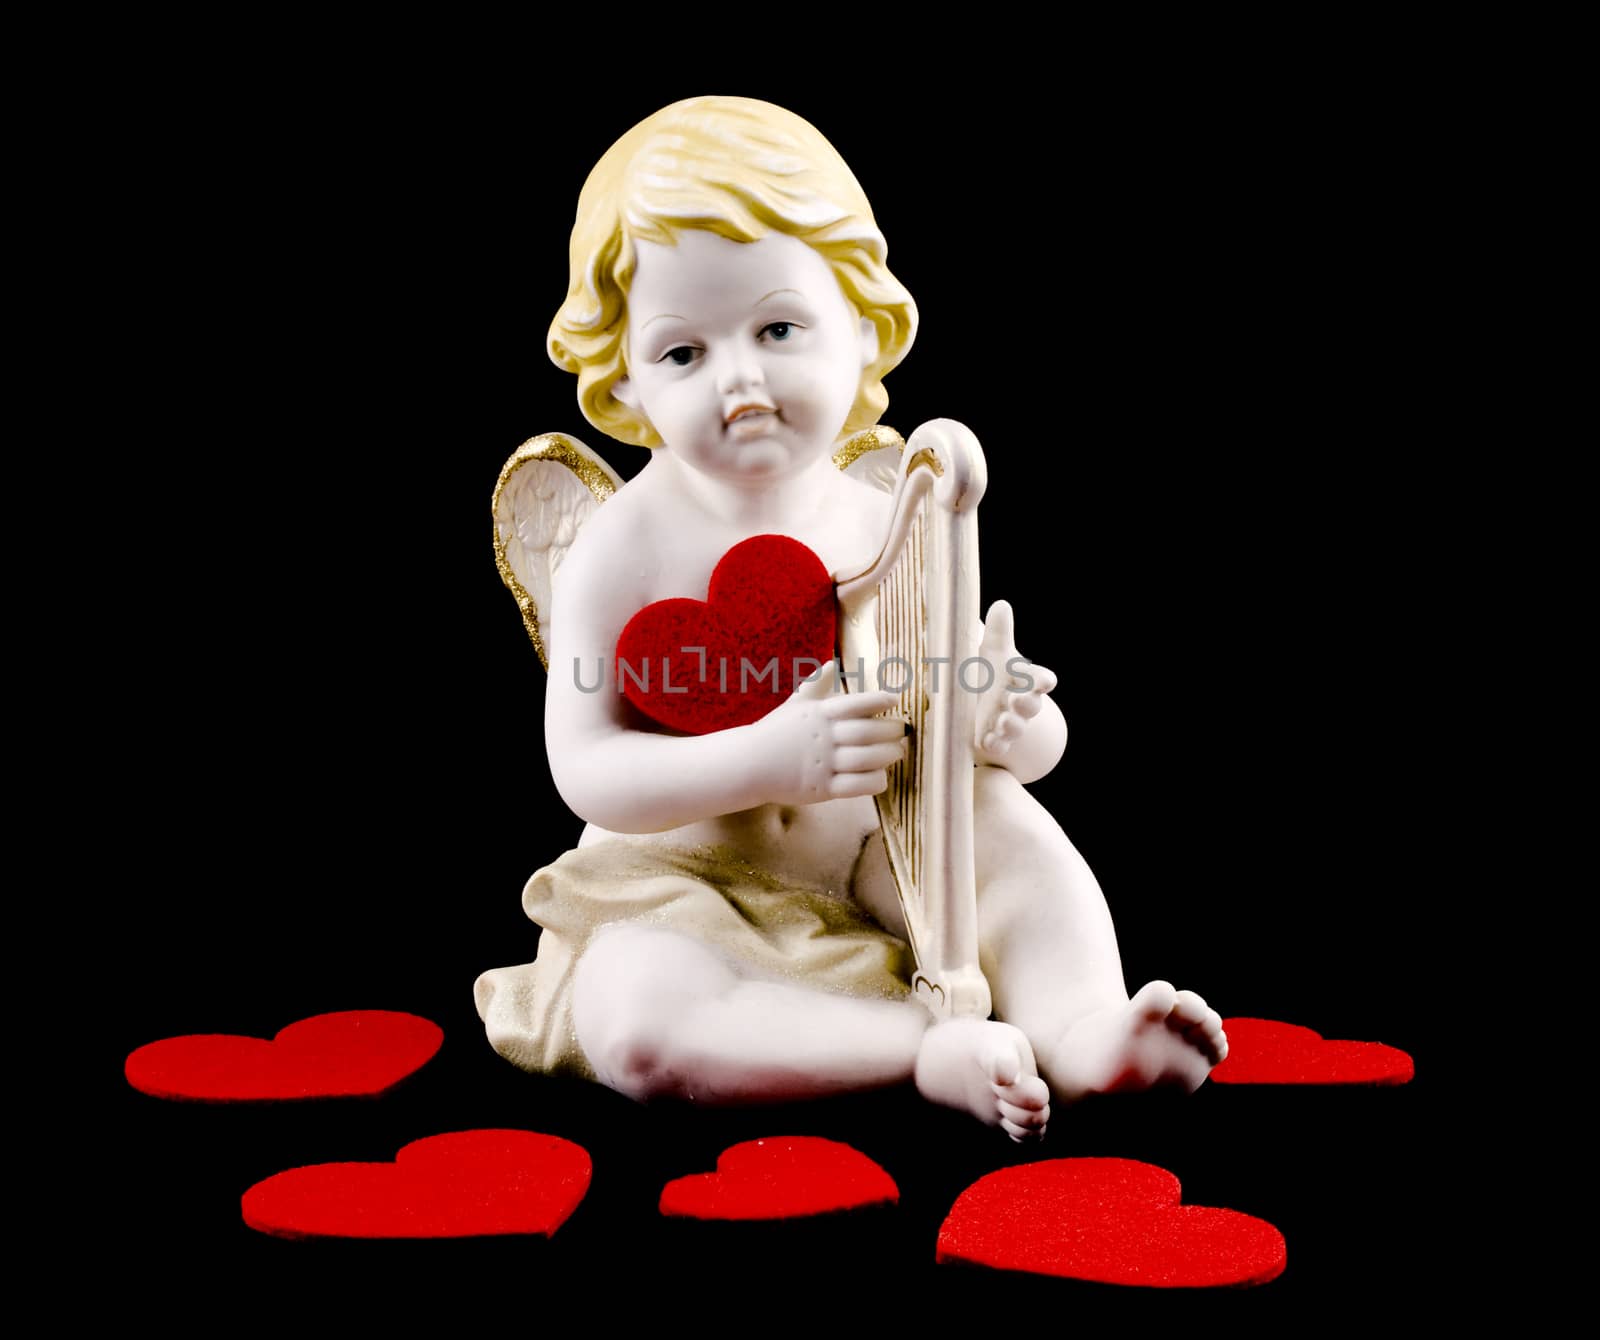 Ceramic cupid figure with felt red heart on black background